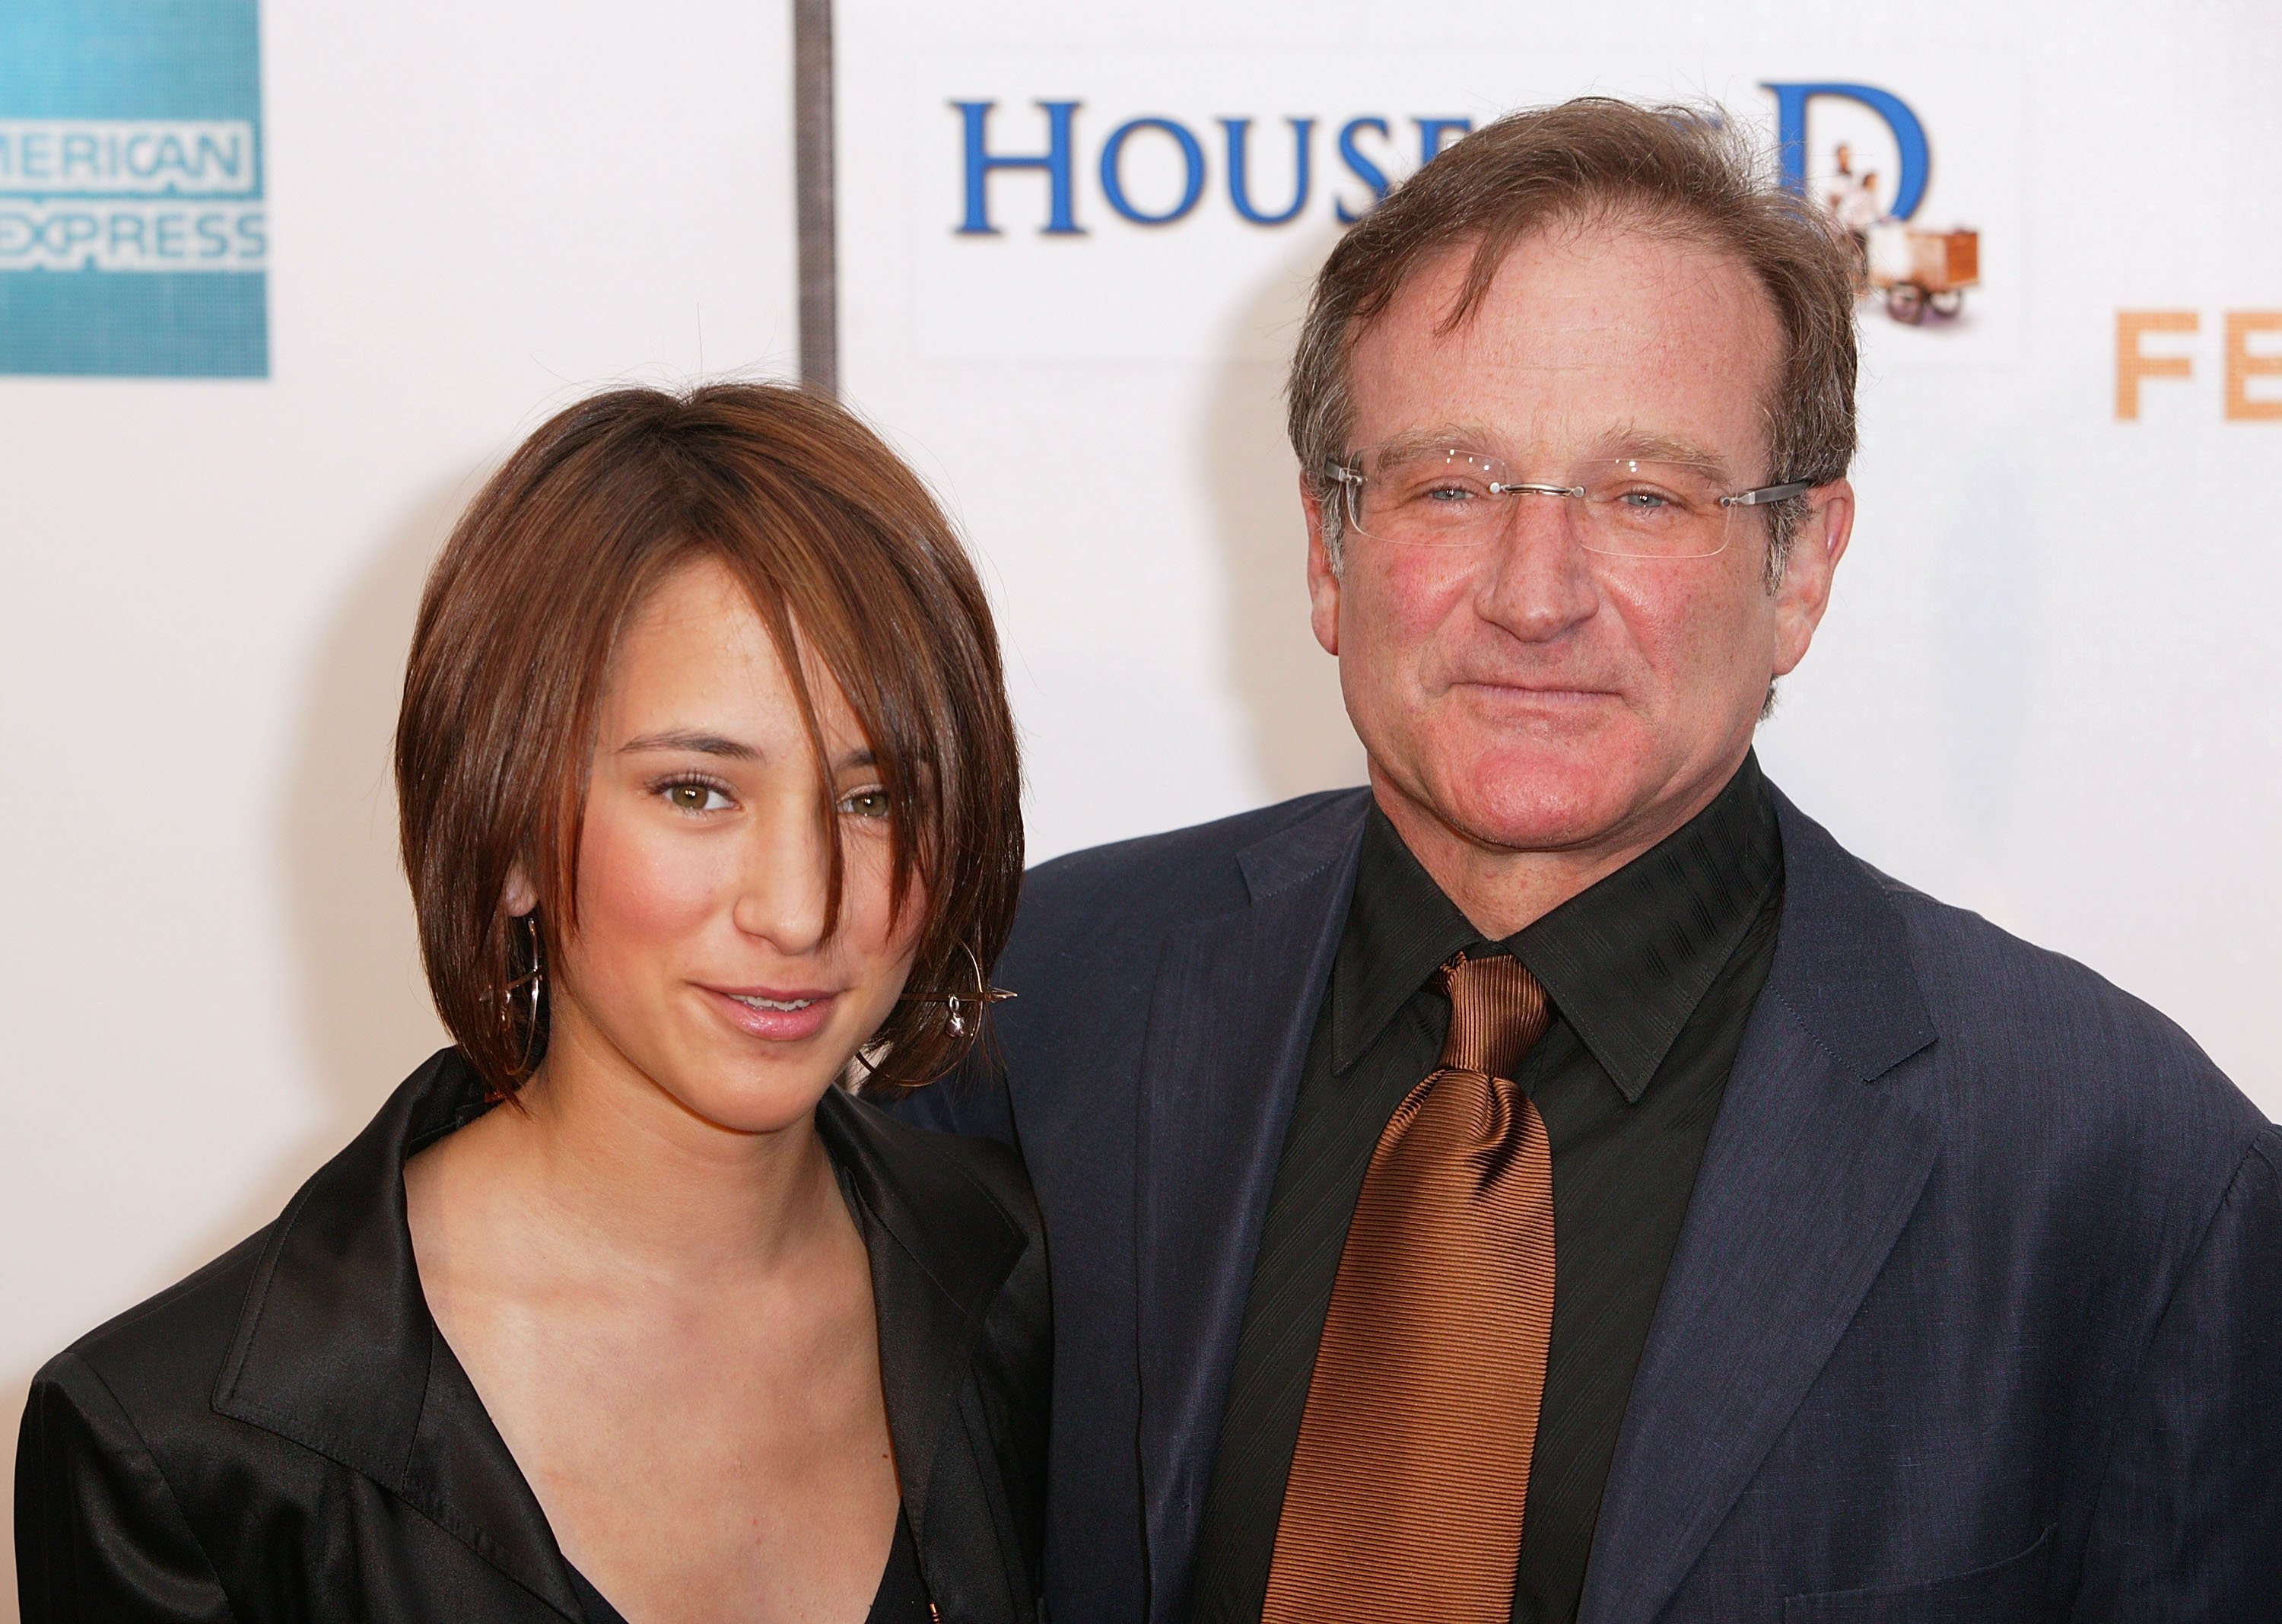 Zelda and Robin Williams at the screening of "House Of D" during the Tribeca Film Festival on May 7, 2004, in New York City | Source: Getty Images